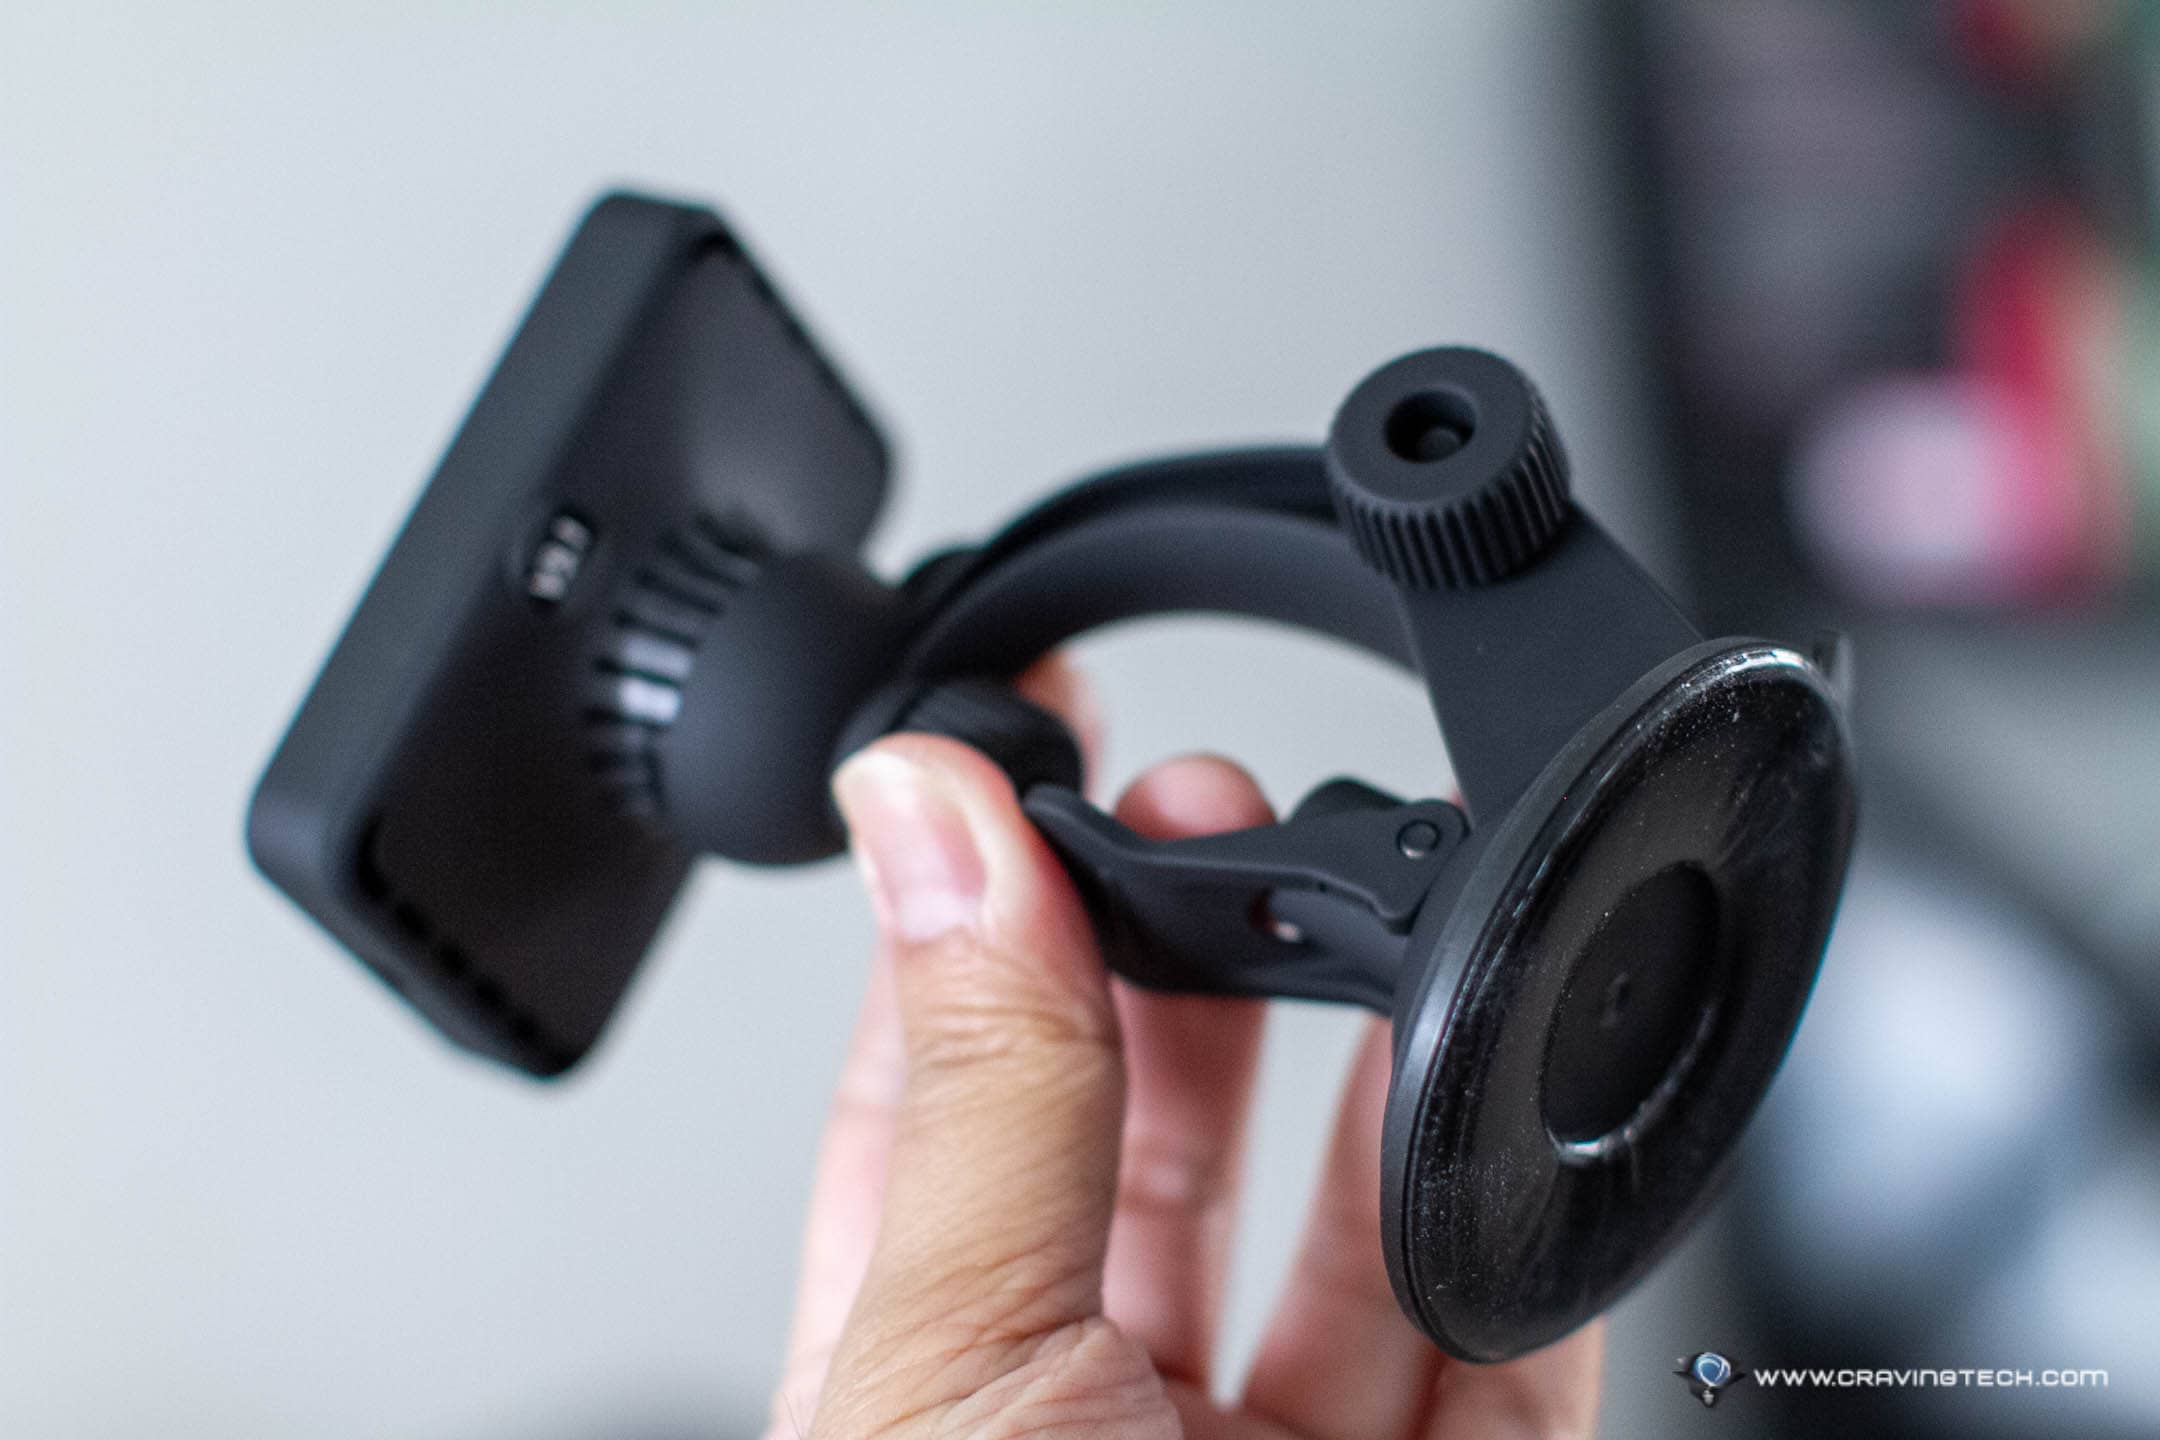 XVIDA MAGNETIC QI WIRELESS CHARGING SUCTION MOUNT Review